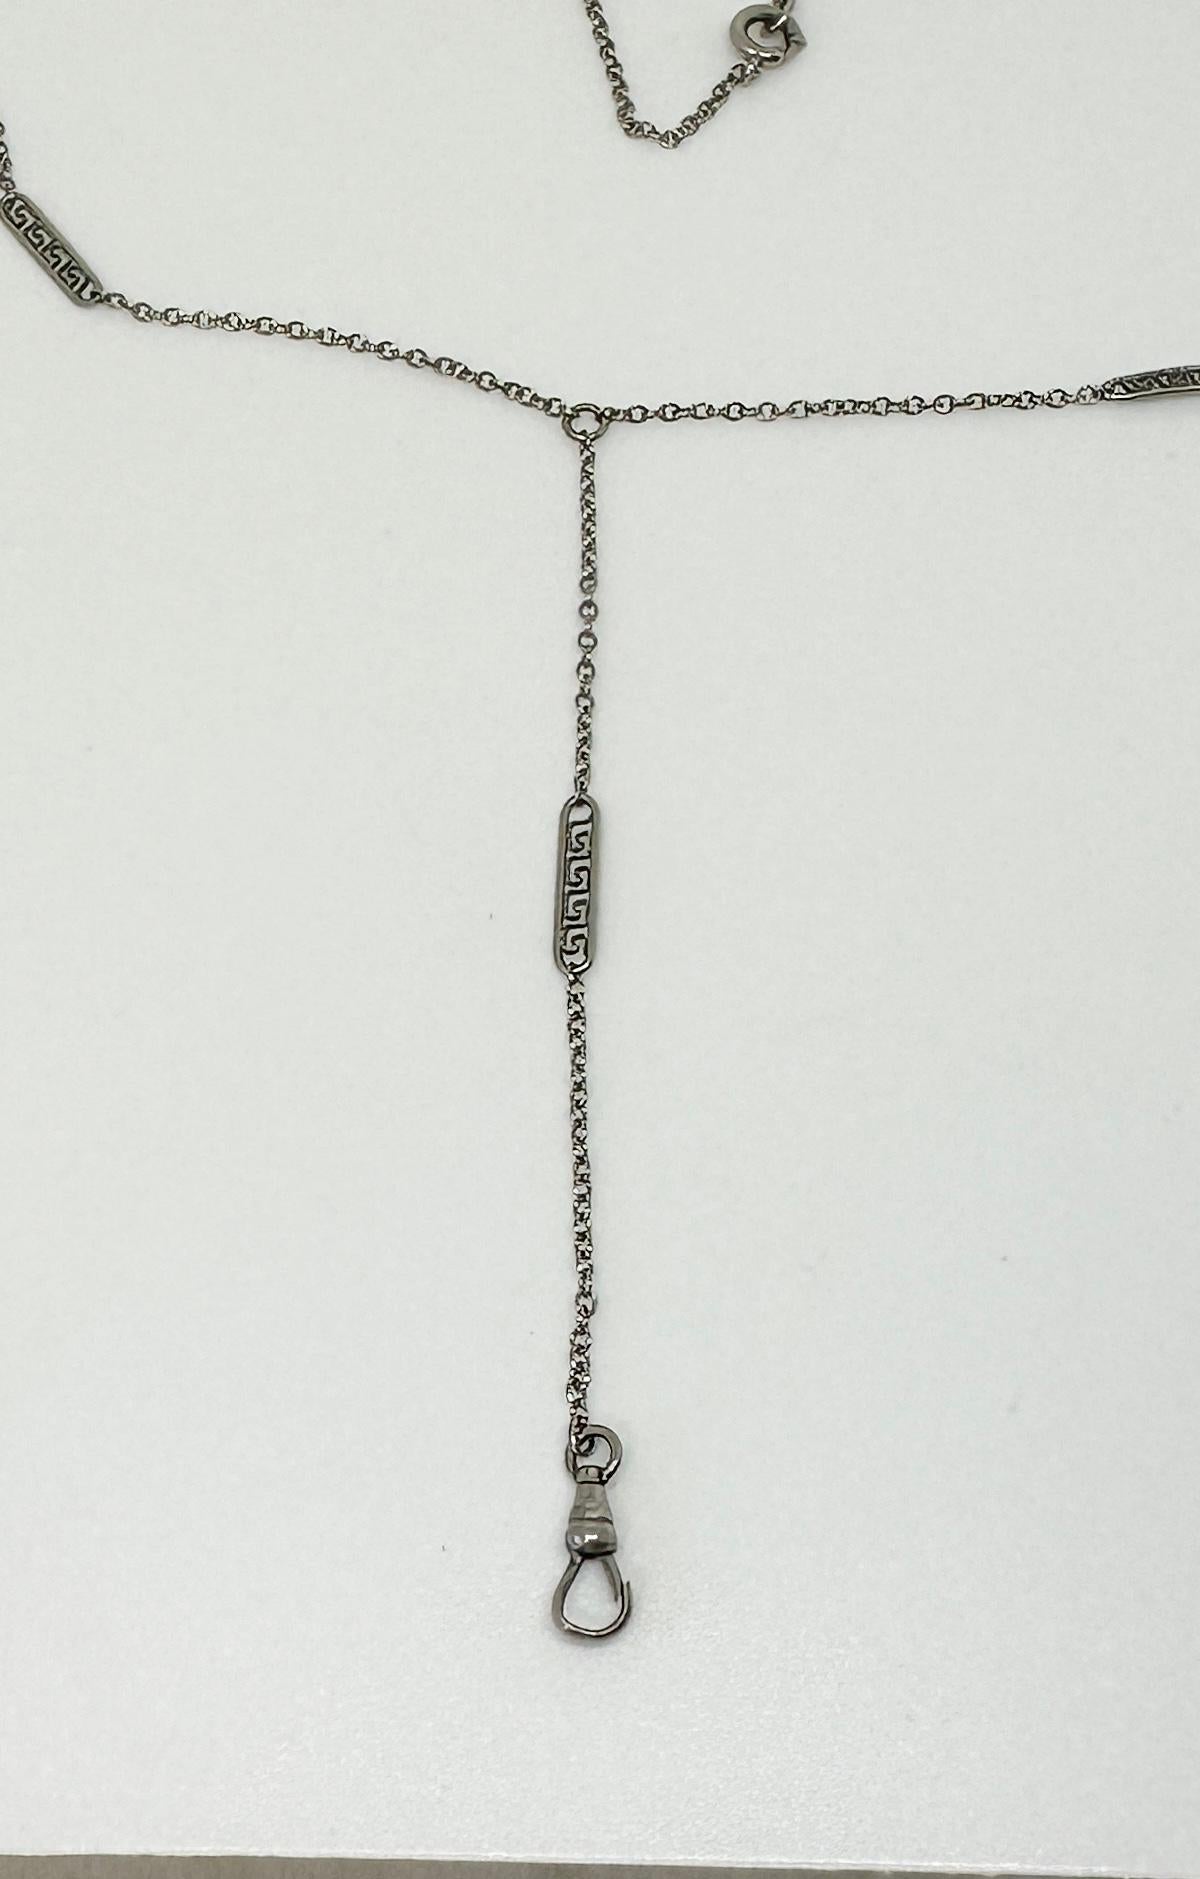 THIS IS A WONDERFUL ANTIQUE ART DECO FANCY LINK CHAIN NECKLACE IN STERLING SILVER WITH A MINIATURE DOG CLIP FOR HANGING YOUR FAVORITE LOCKET OR PENDANT AND STUNNING GREEK KEY MOTIF DECORATIVE LINKS THROUGHOUT THE CHAIN.
The chain has five Greek Key